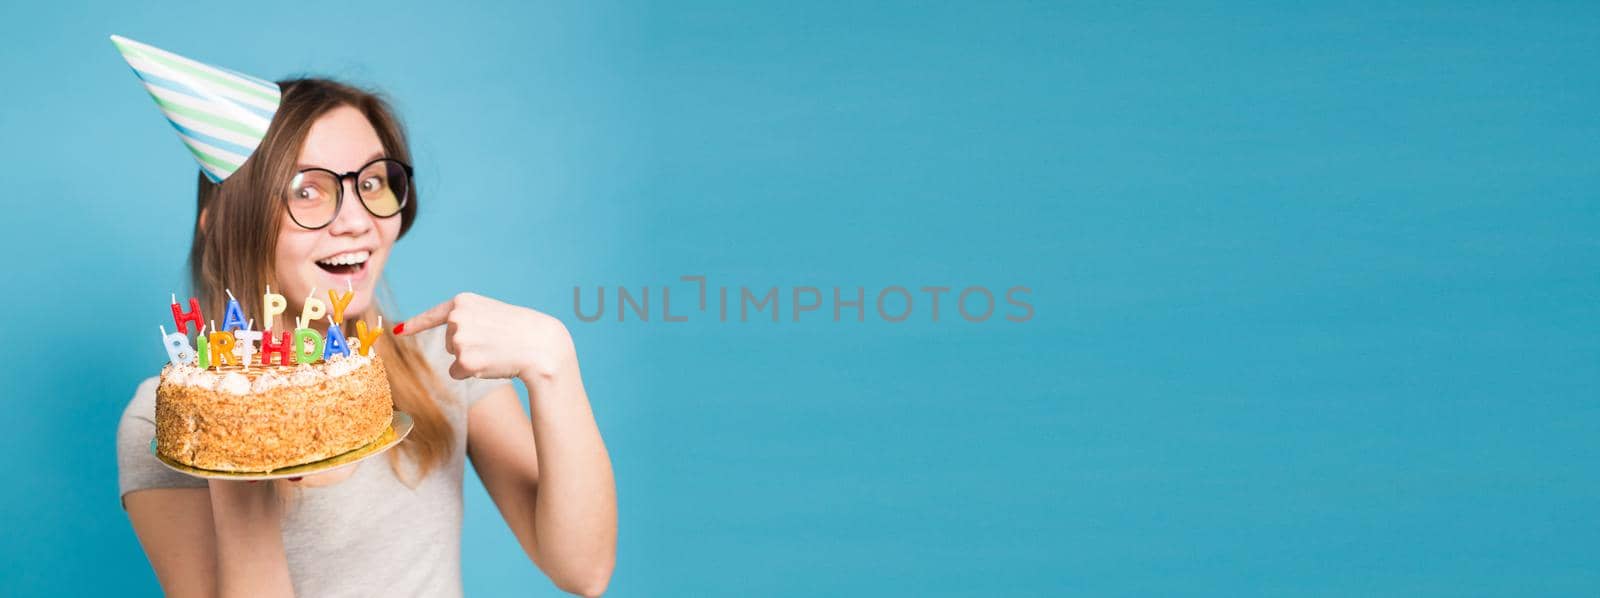 Charming merry crazy young girl student in congratulatory paper hat holding a happy birthday cake in her hands standing against a blue background. Advertising space